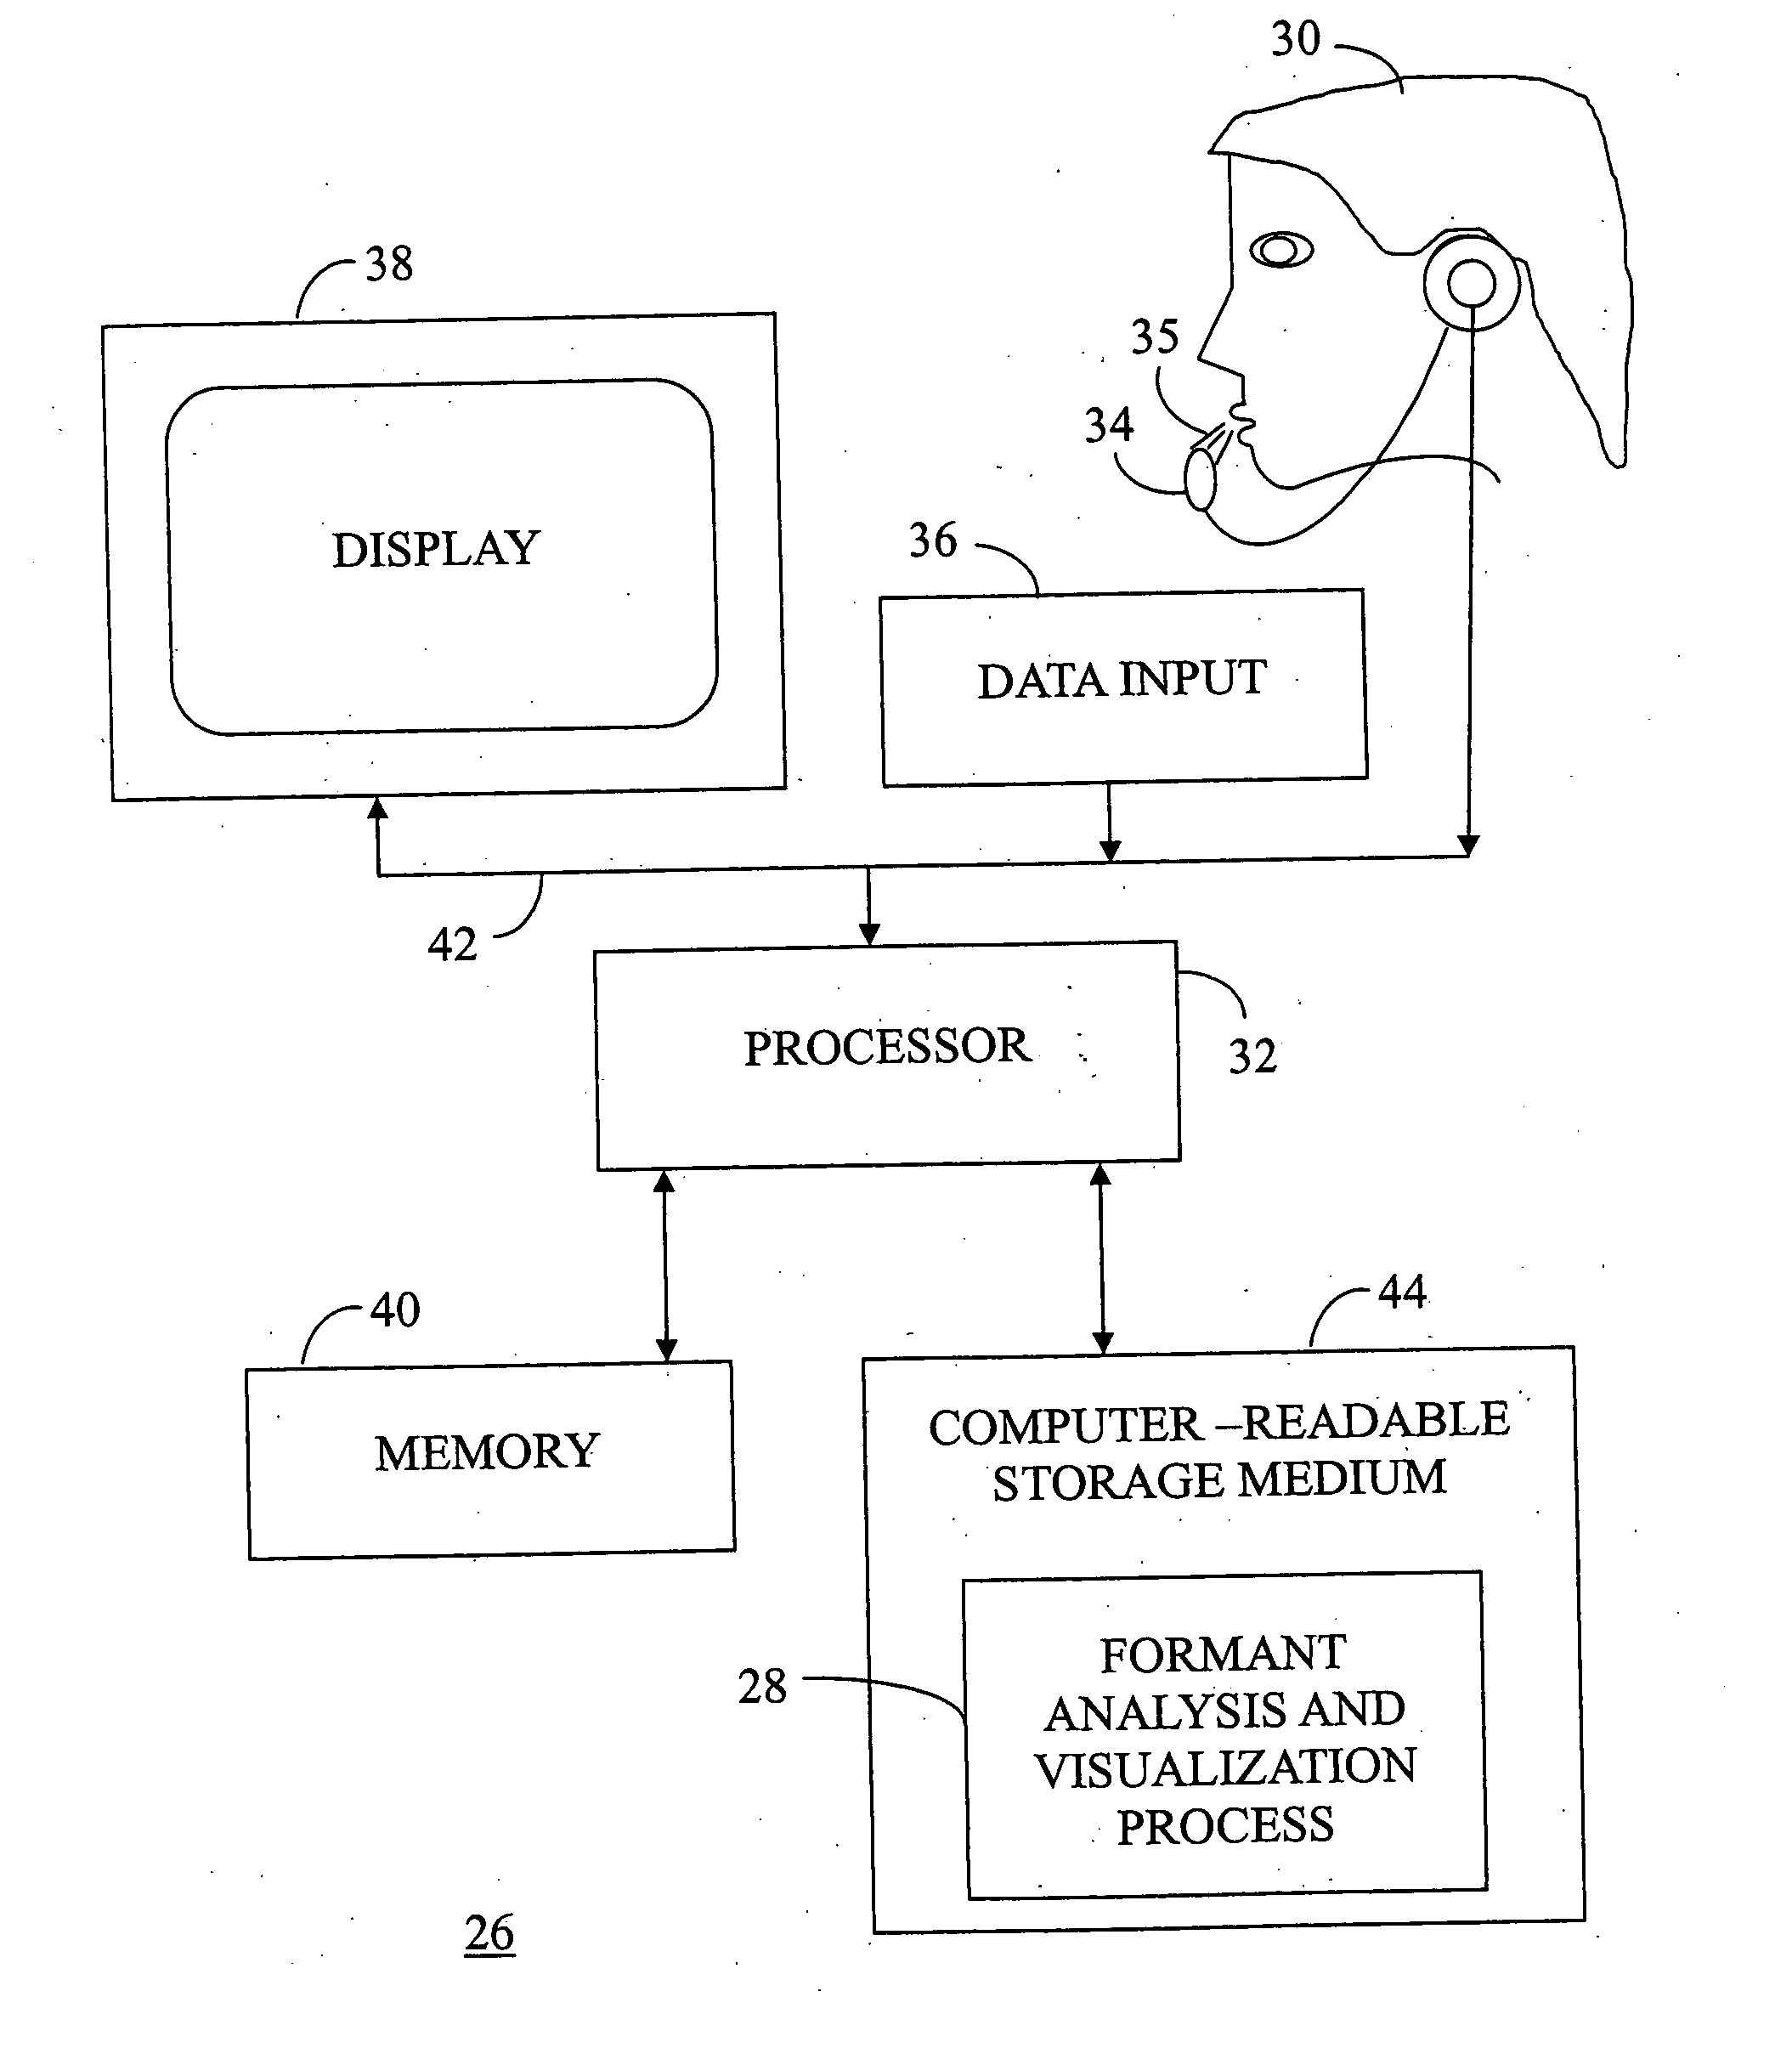 Real time voice analysis and method for providing speech therapy